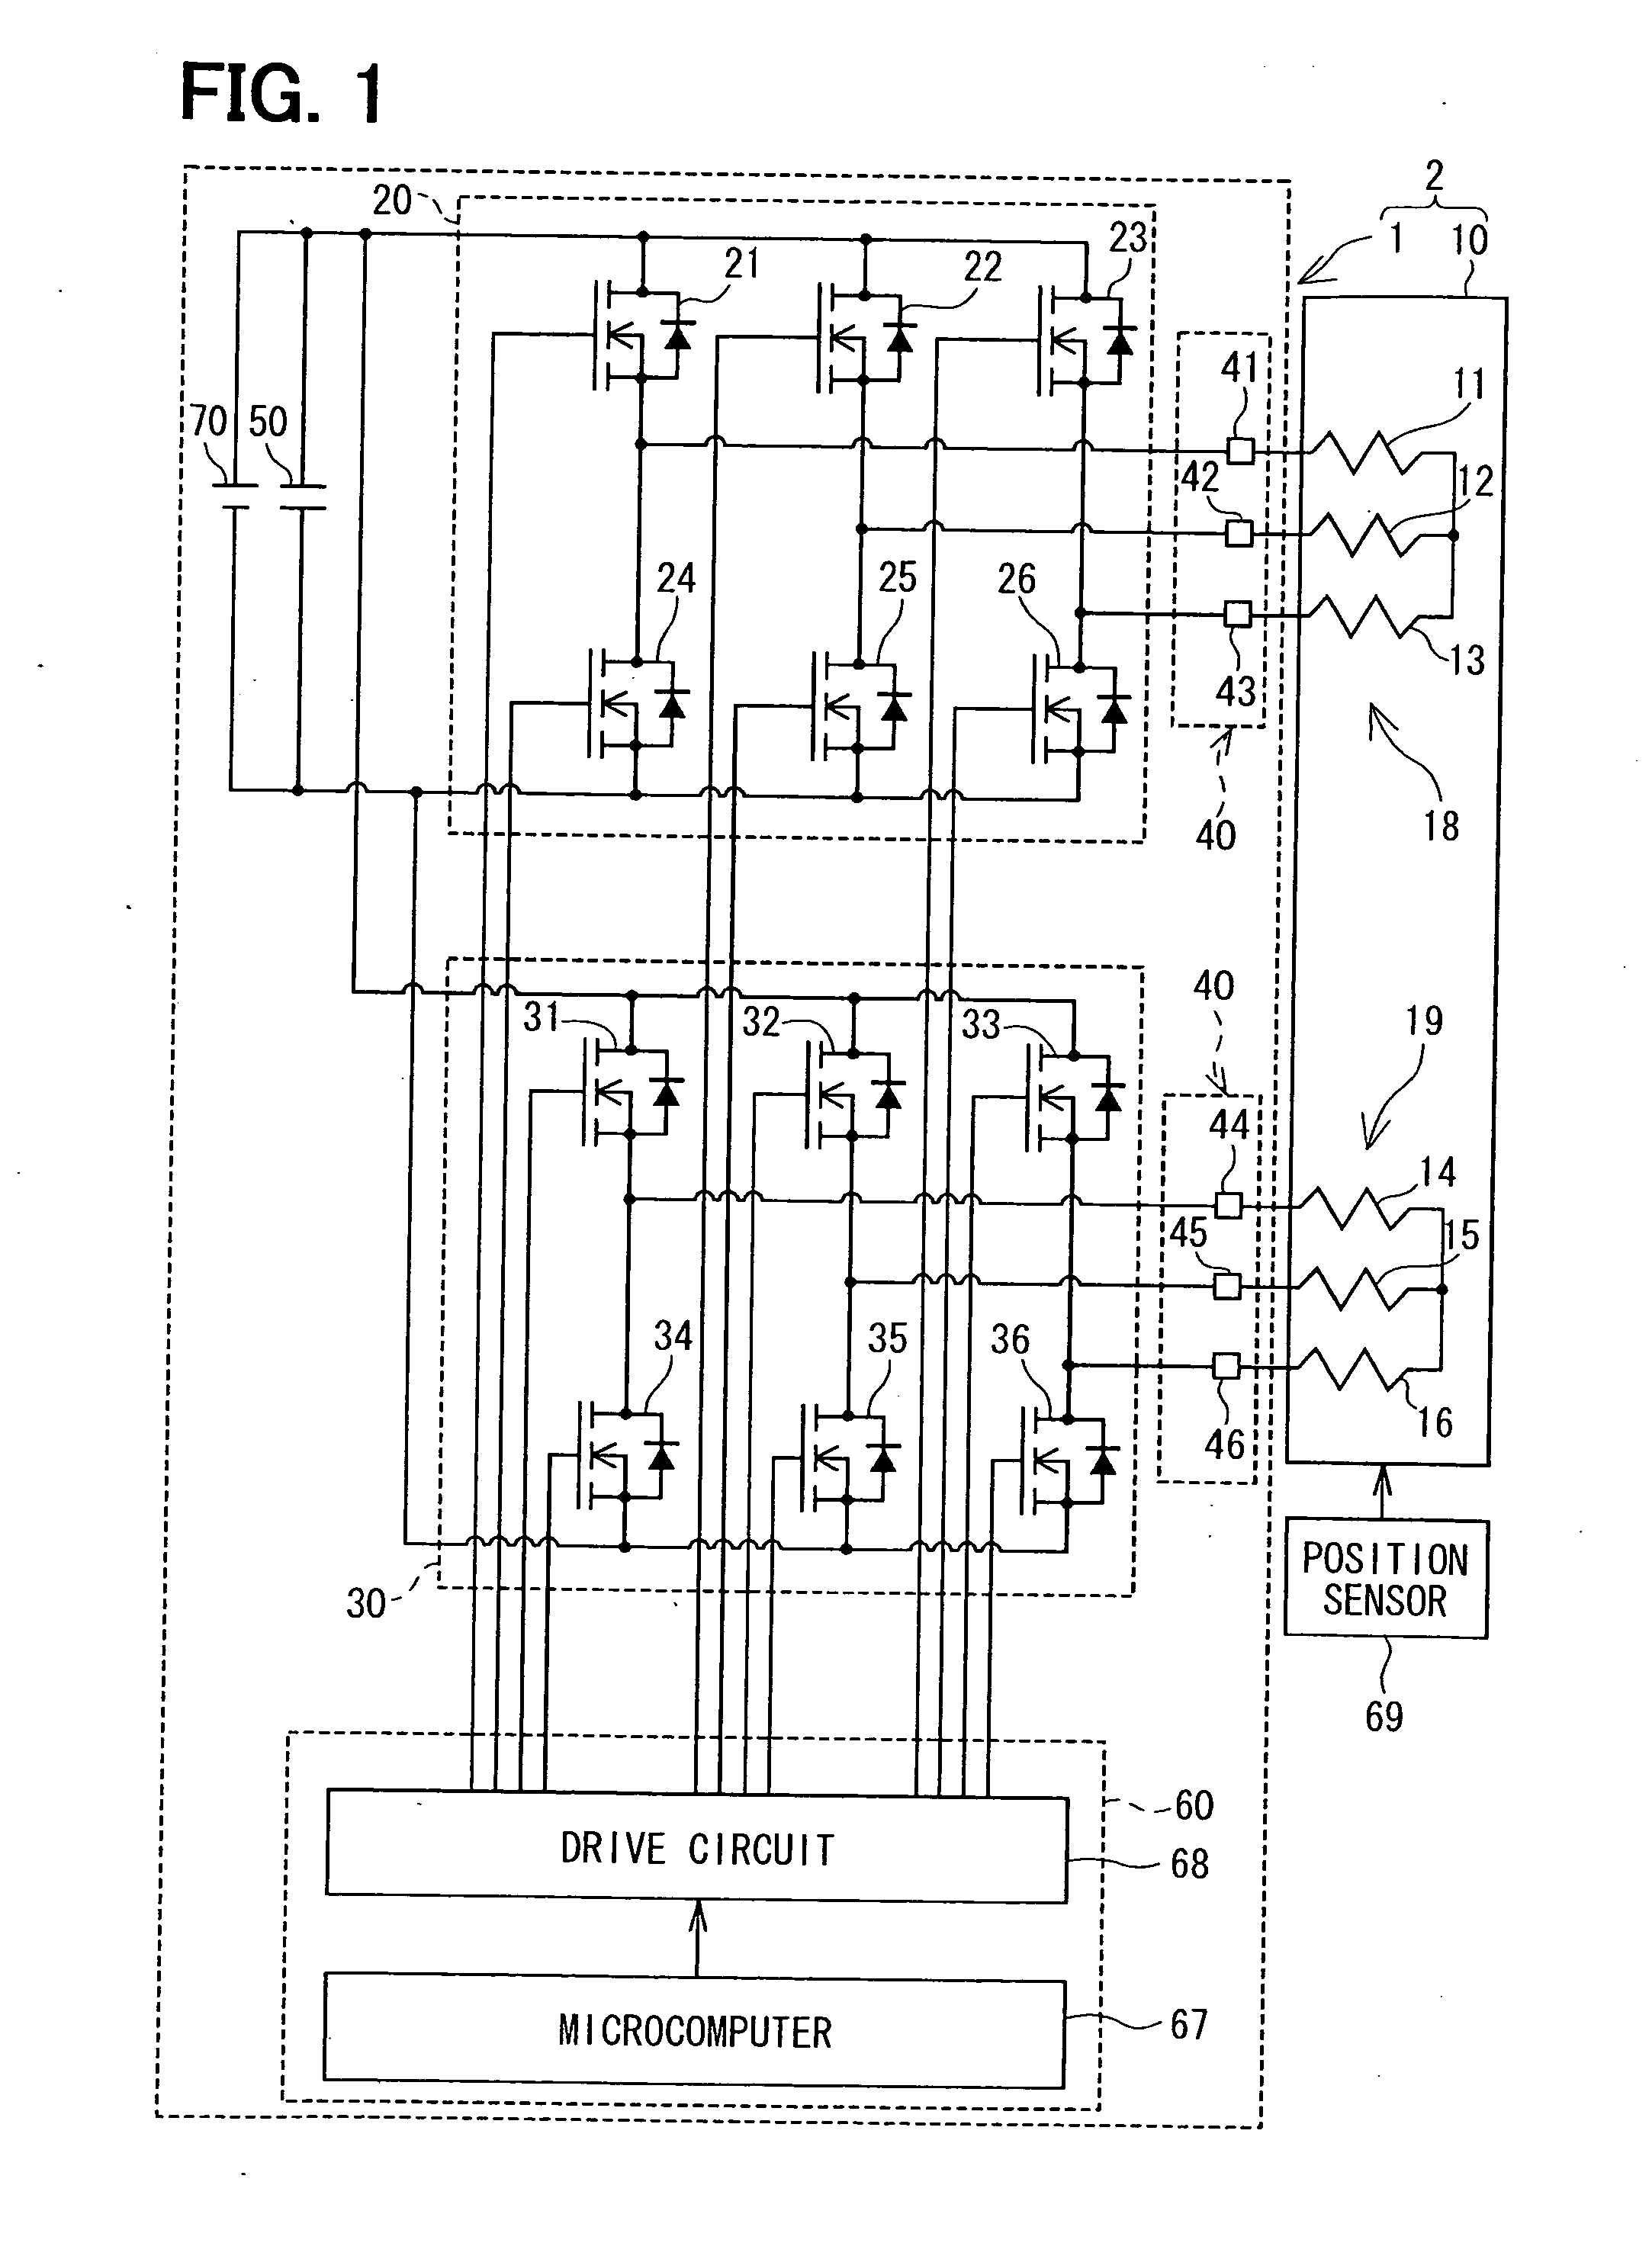 Electric power converter, driving apparatus and electric power steering apparatus